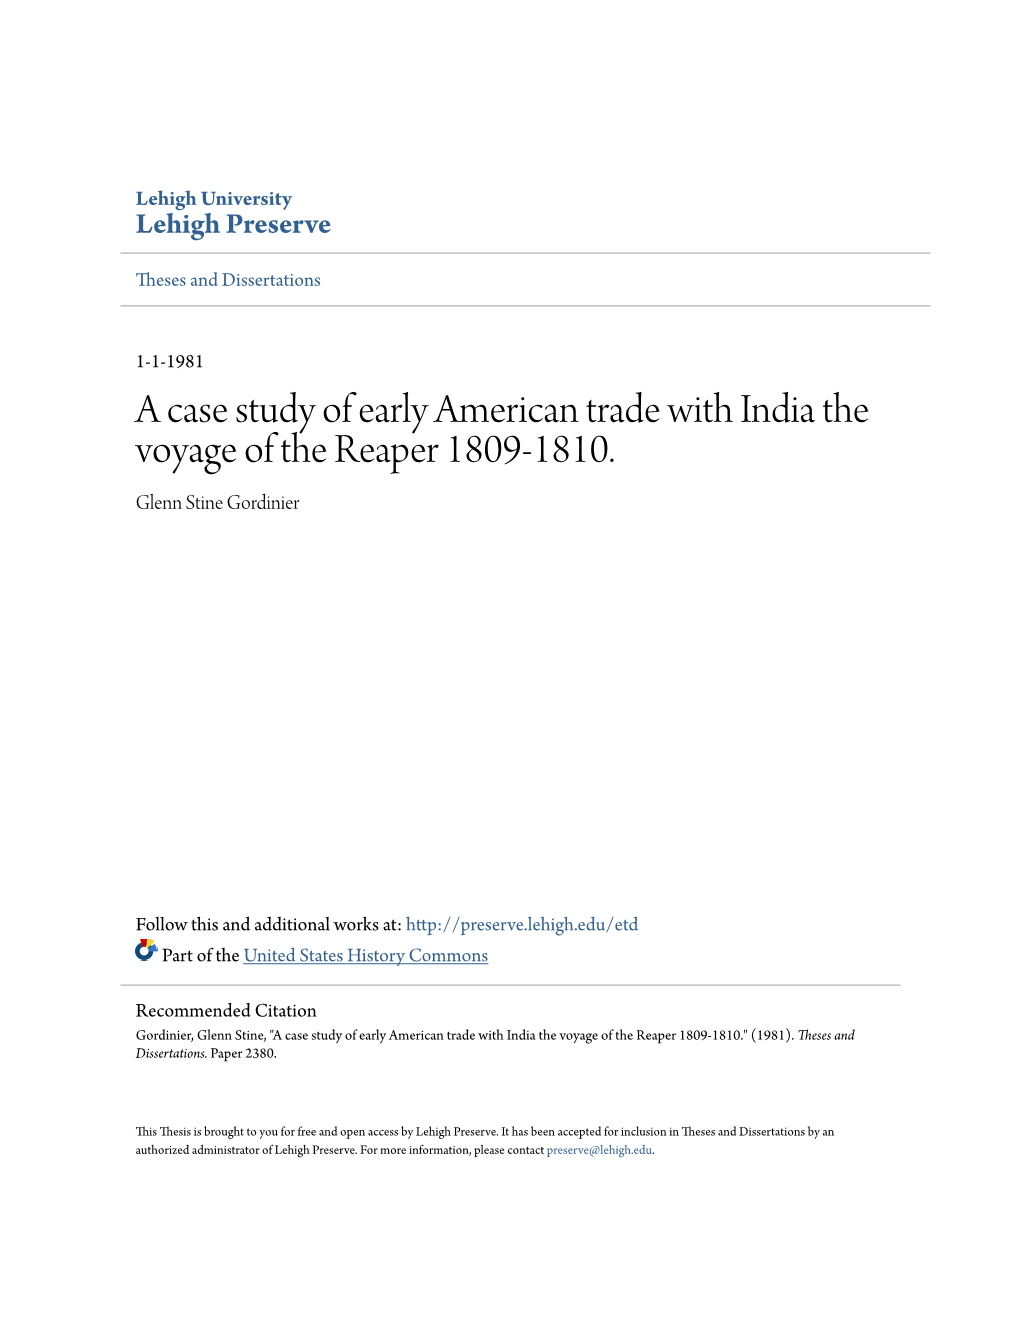 A Case Study of Early American Trade with India the Voyage of the Reaper 1809-1810